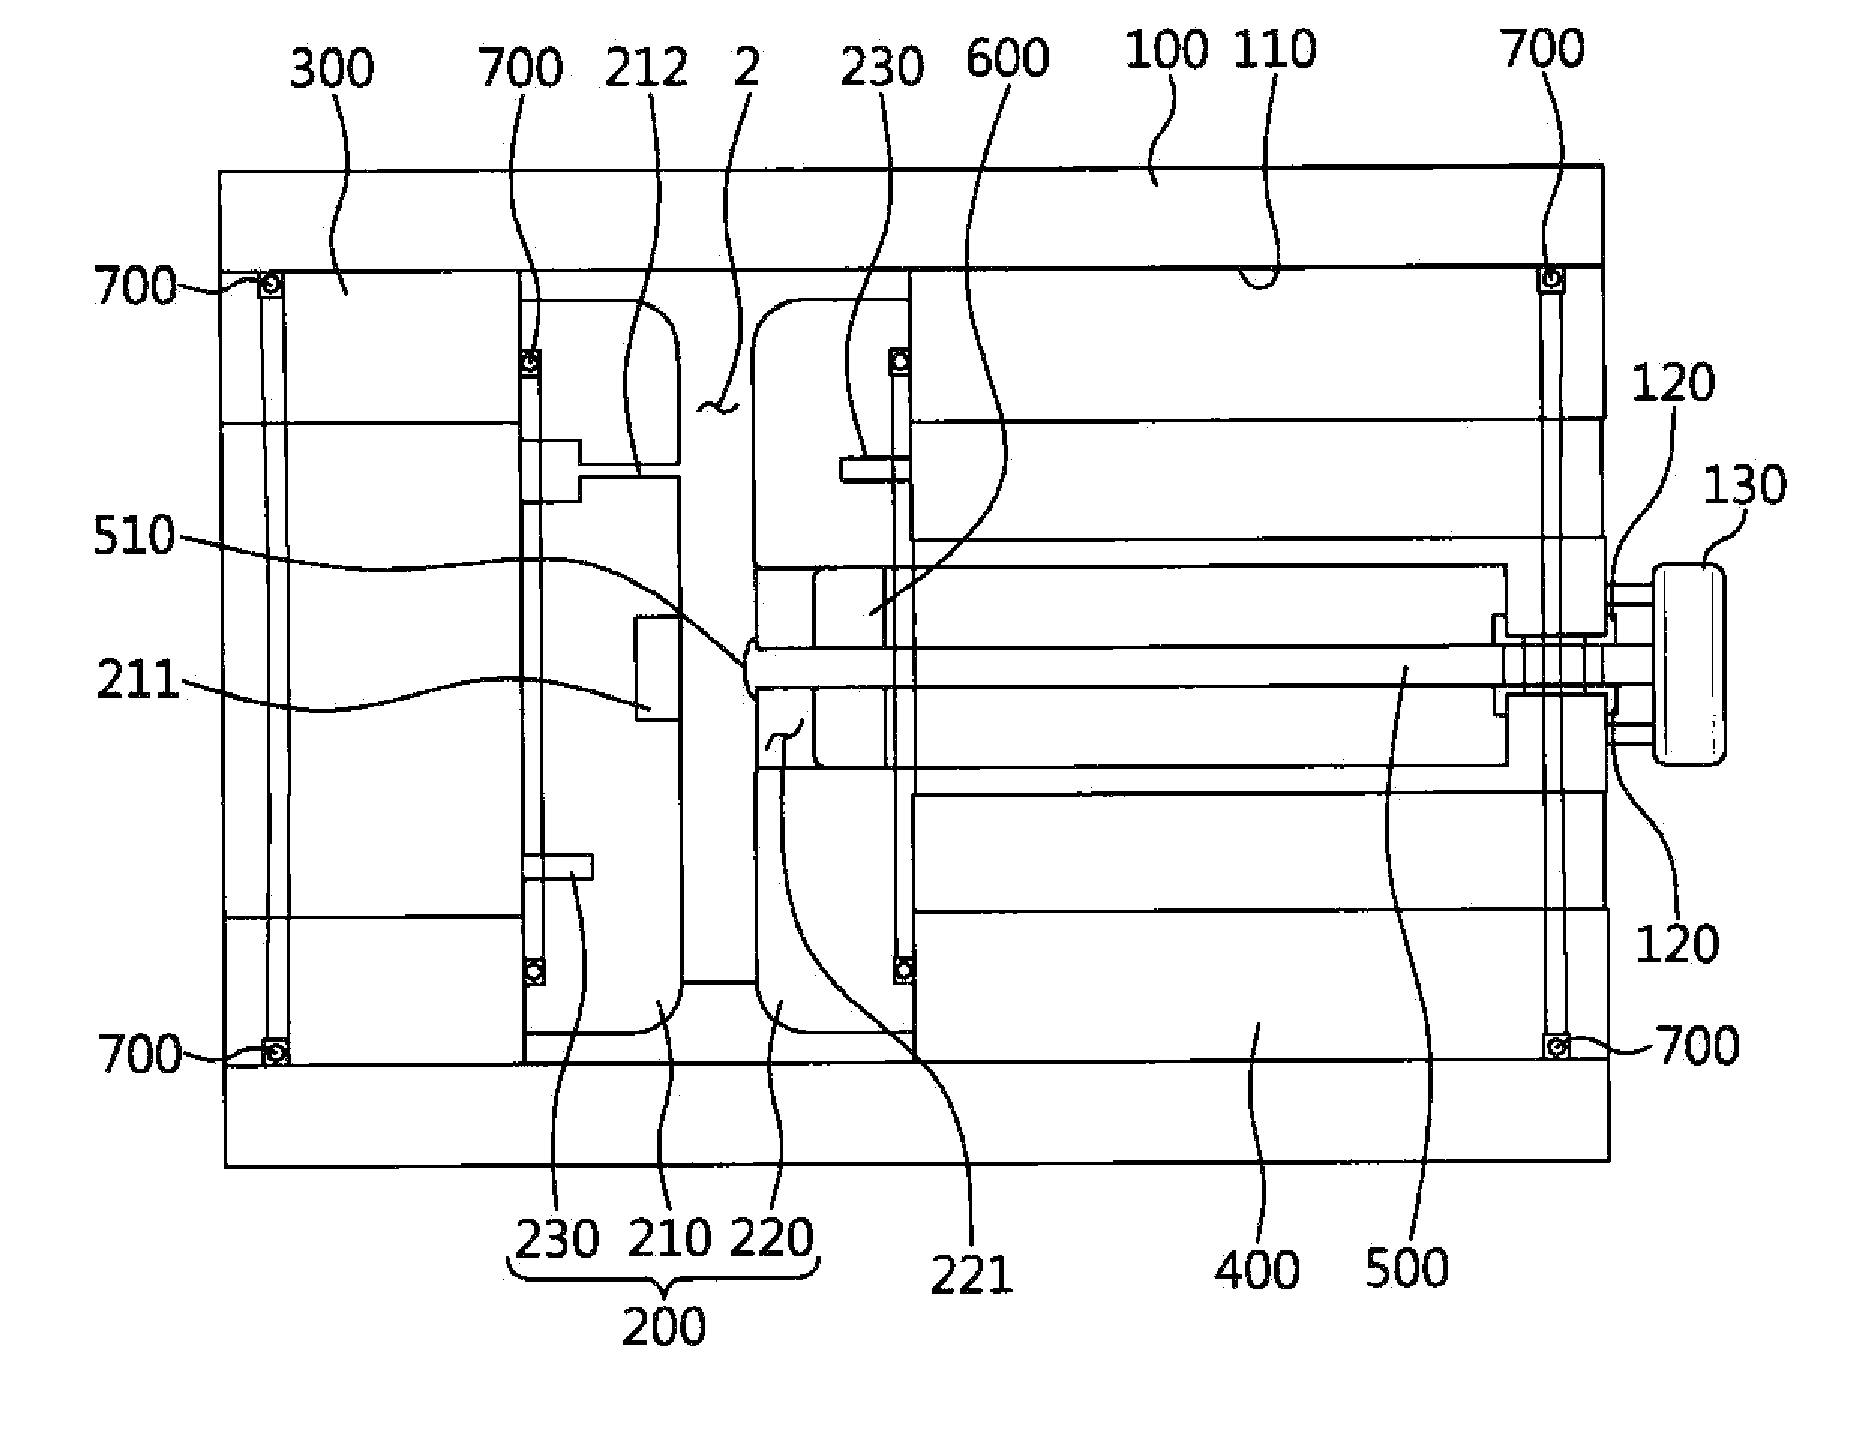 Microwave pulse generator with variable frequency emission